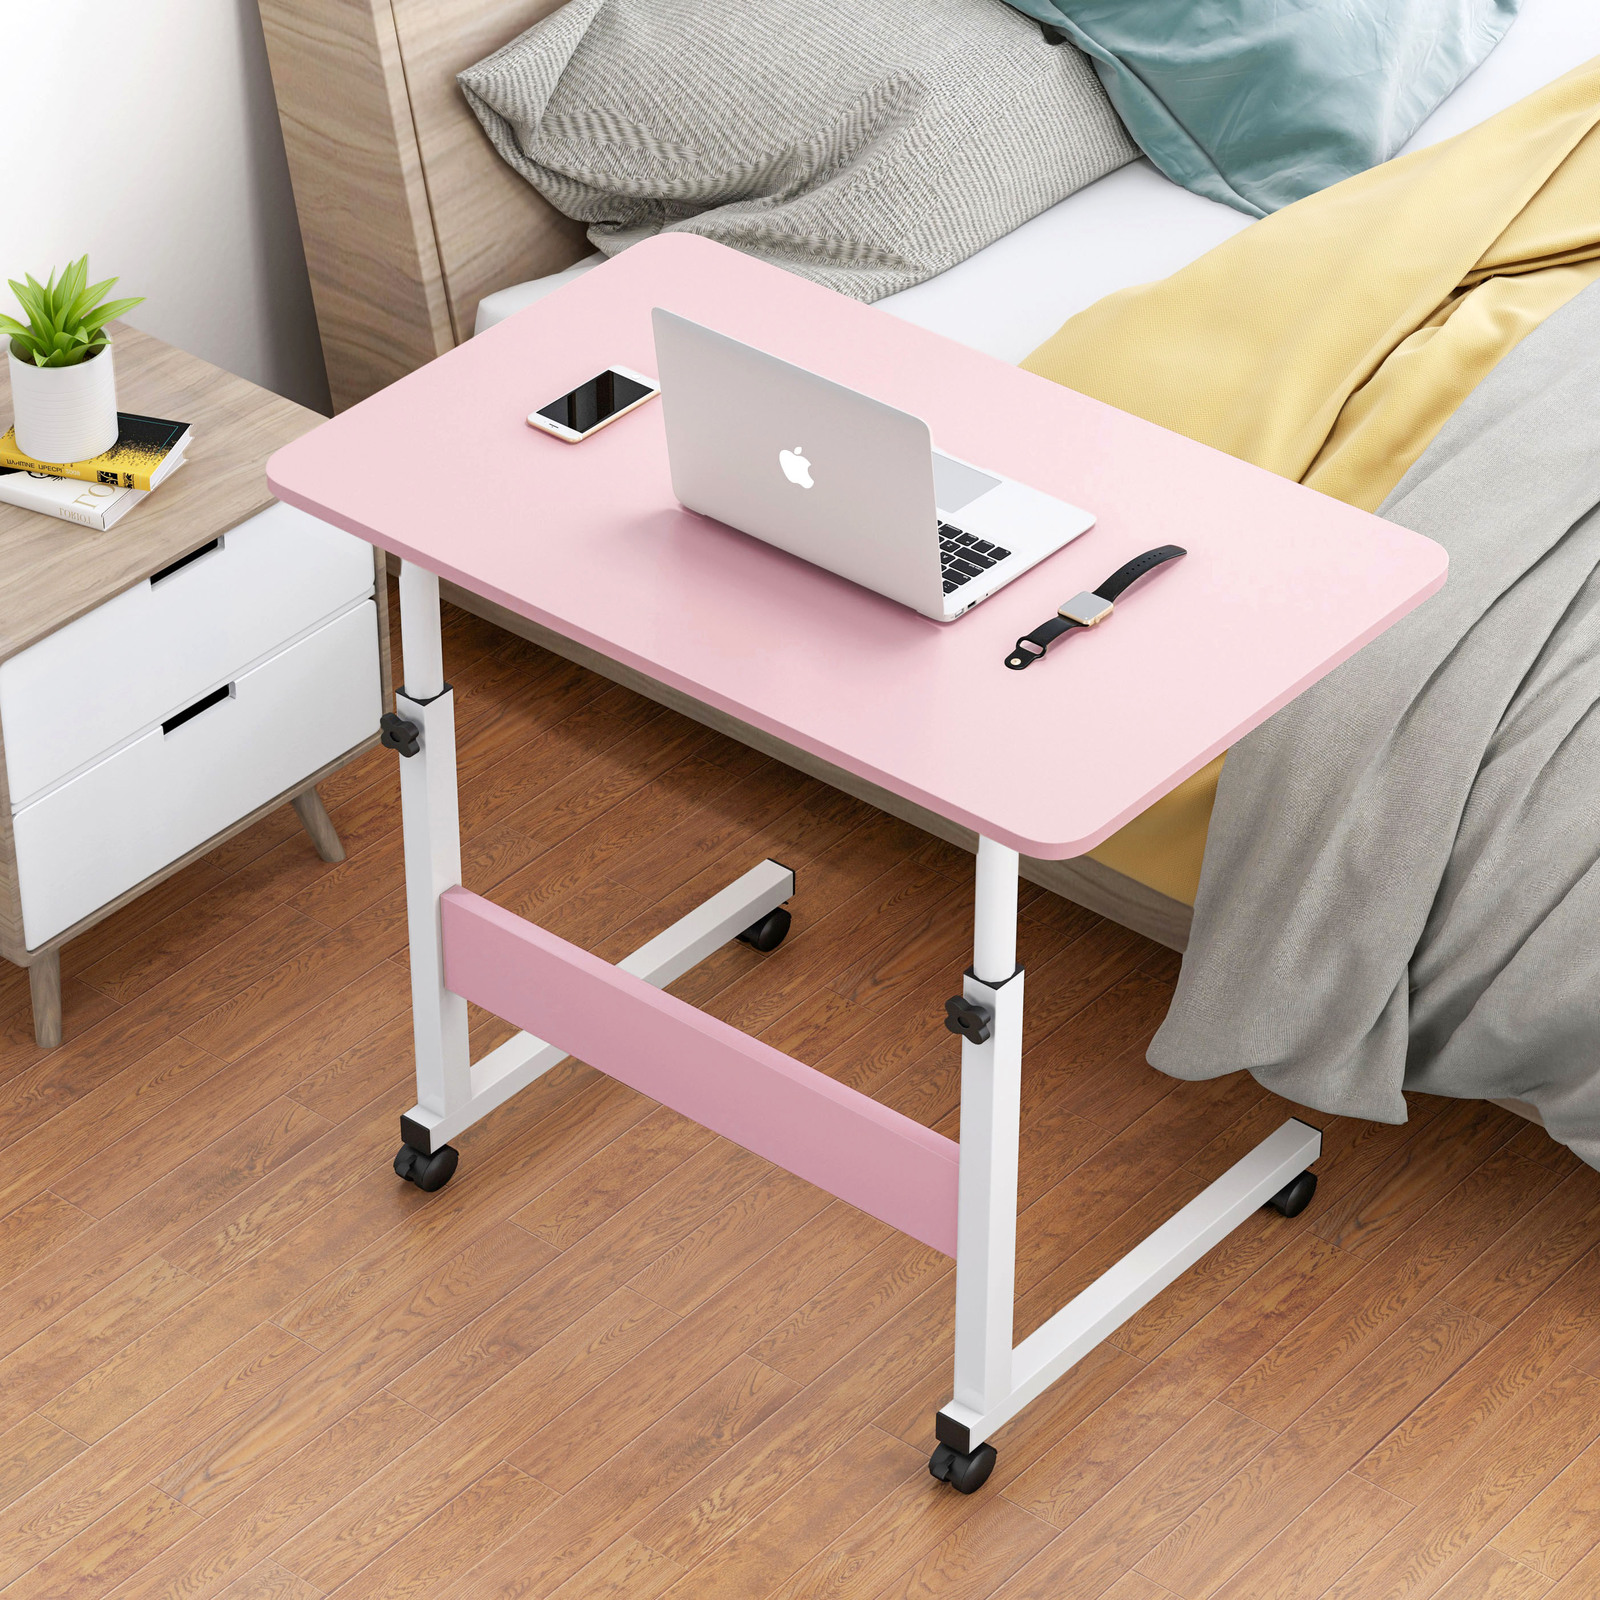 Impact Adjustable Portable Sofa Bed Side Table Laptop Desk with Wheels (Pink)